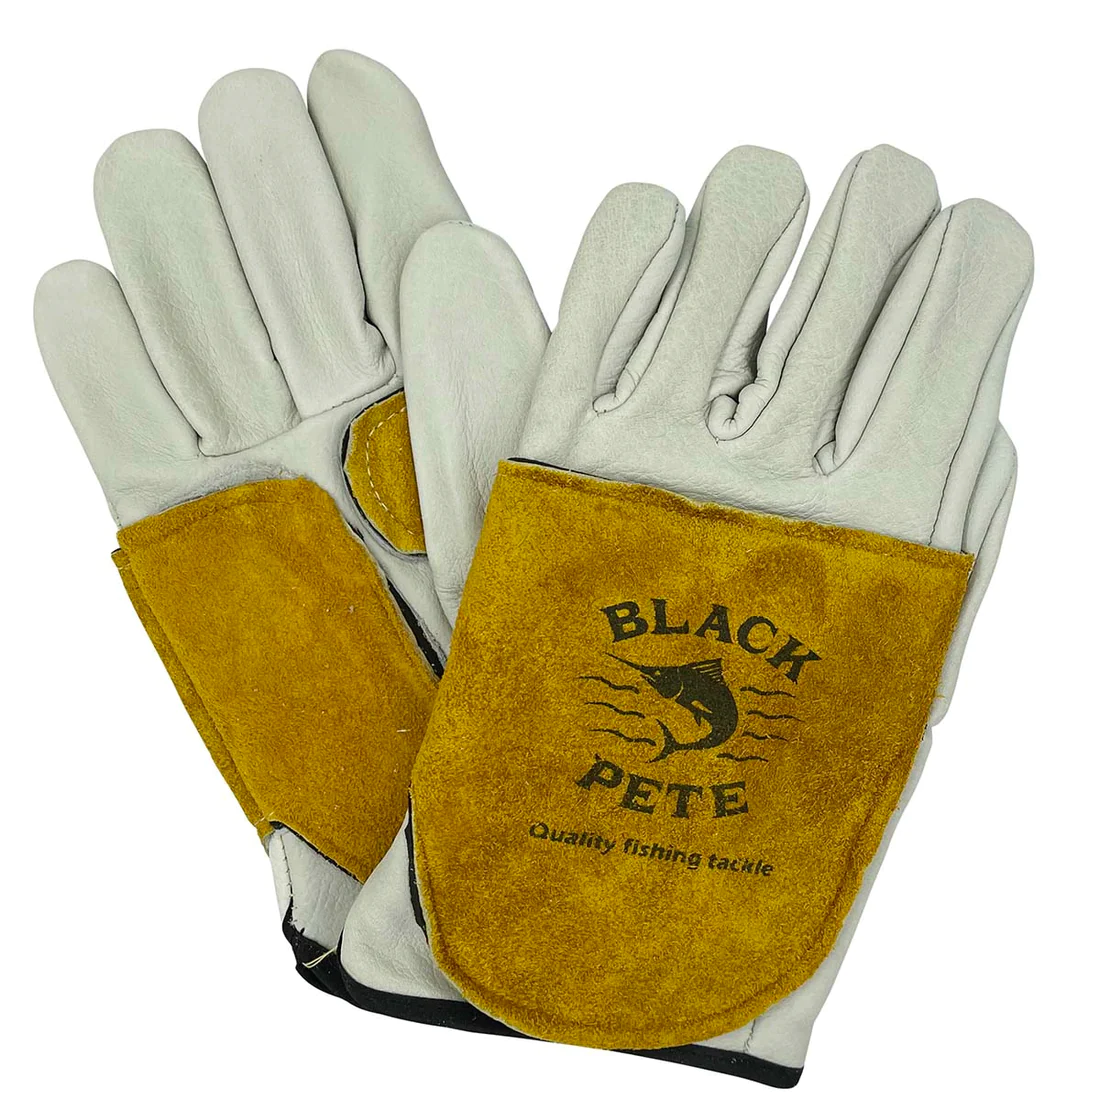 Black Pete Tracing Gloves Heavy Tackle [sz:l]